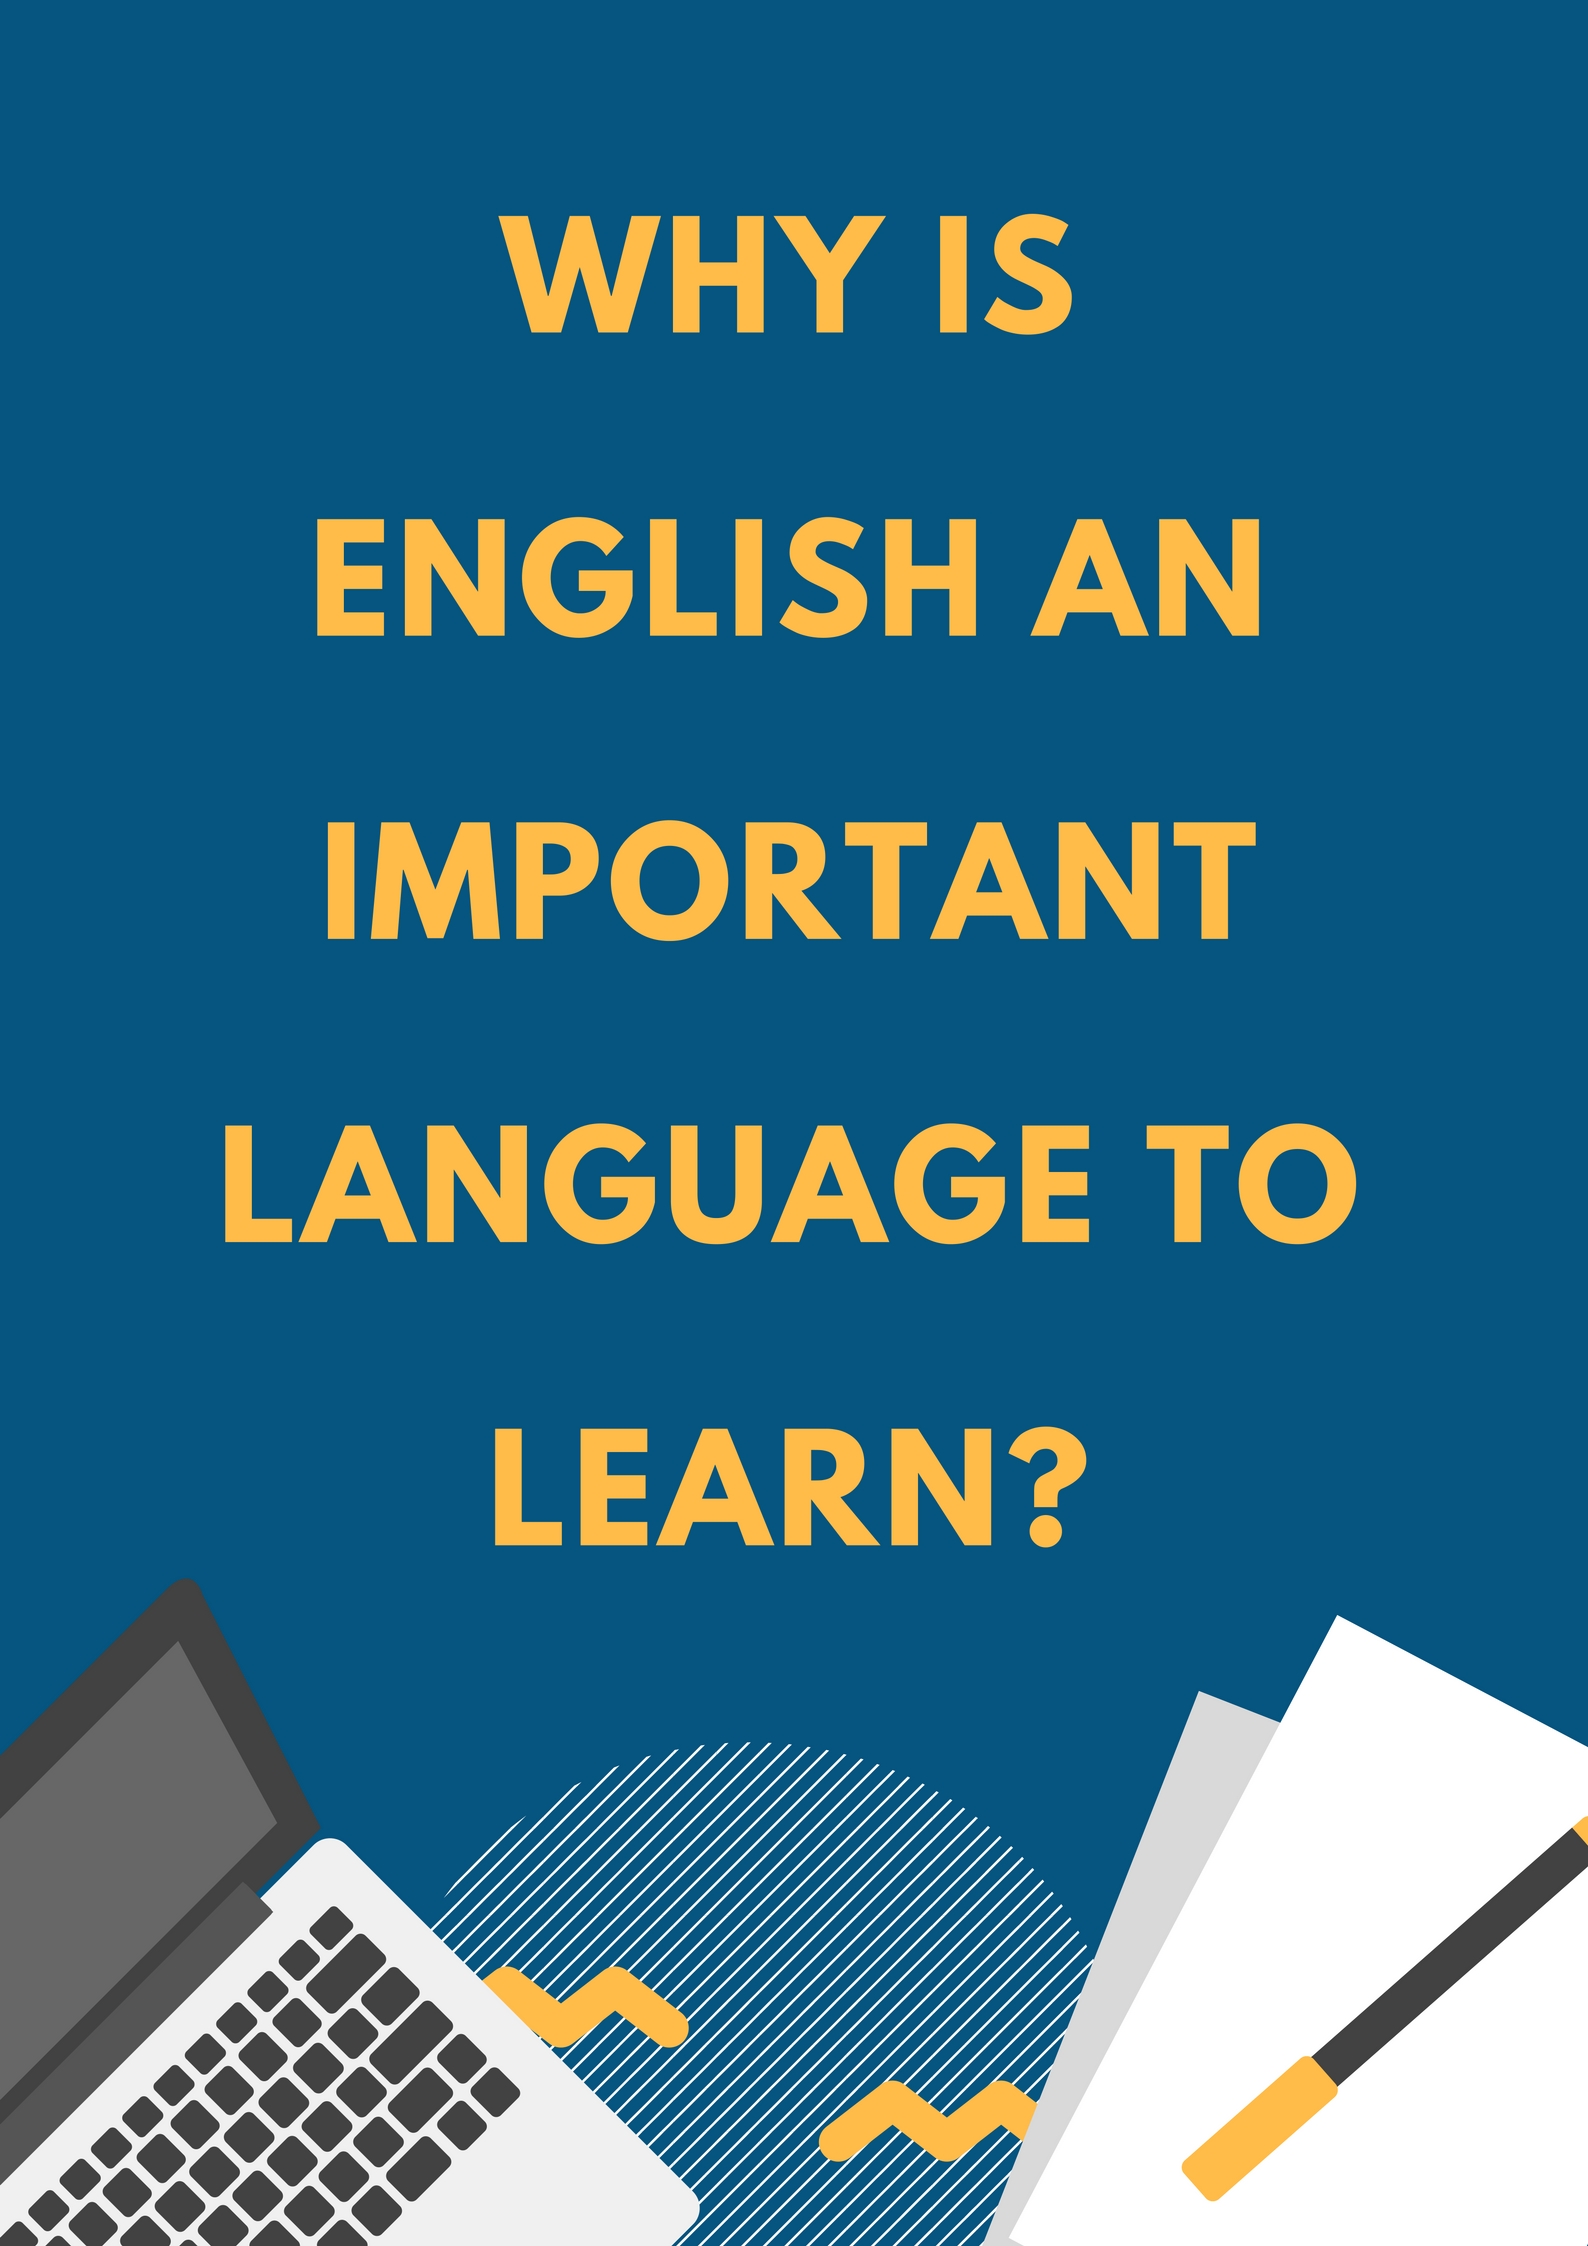 WHY IS ENGLISH AN IMPORTANT LANGUAGE TO LEARN - Shine Consultancy